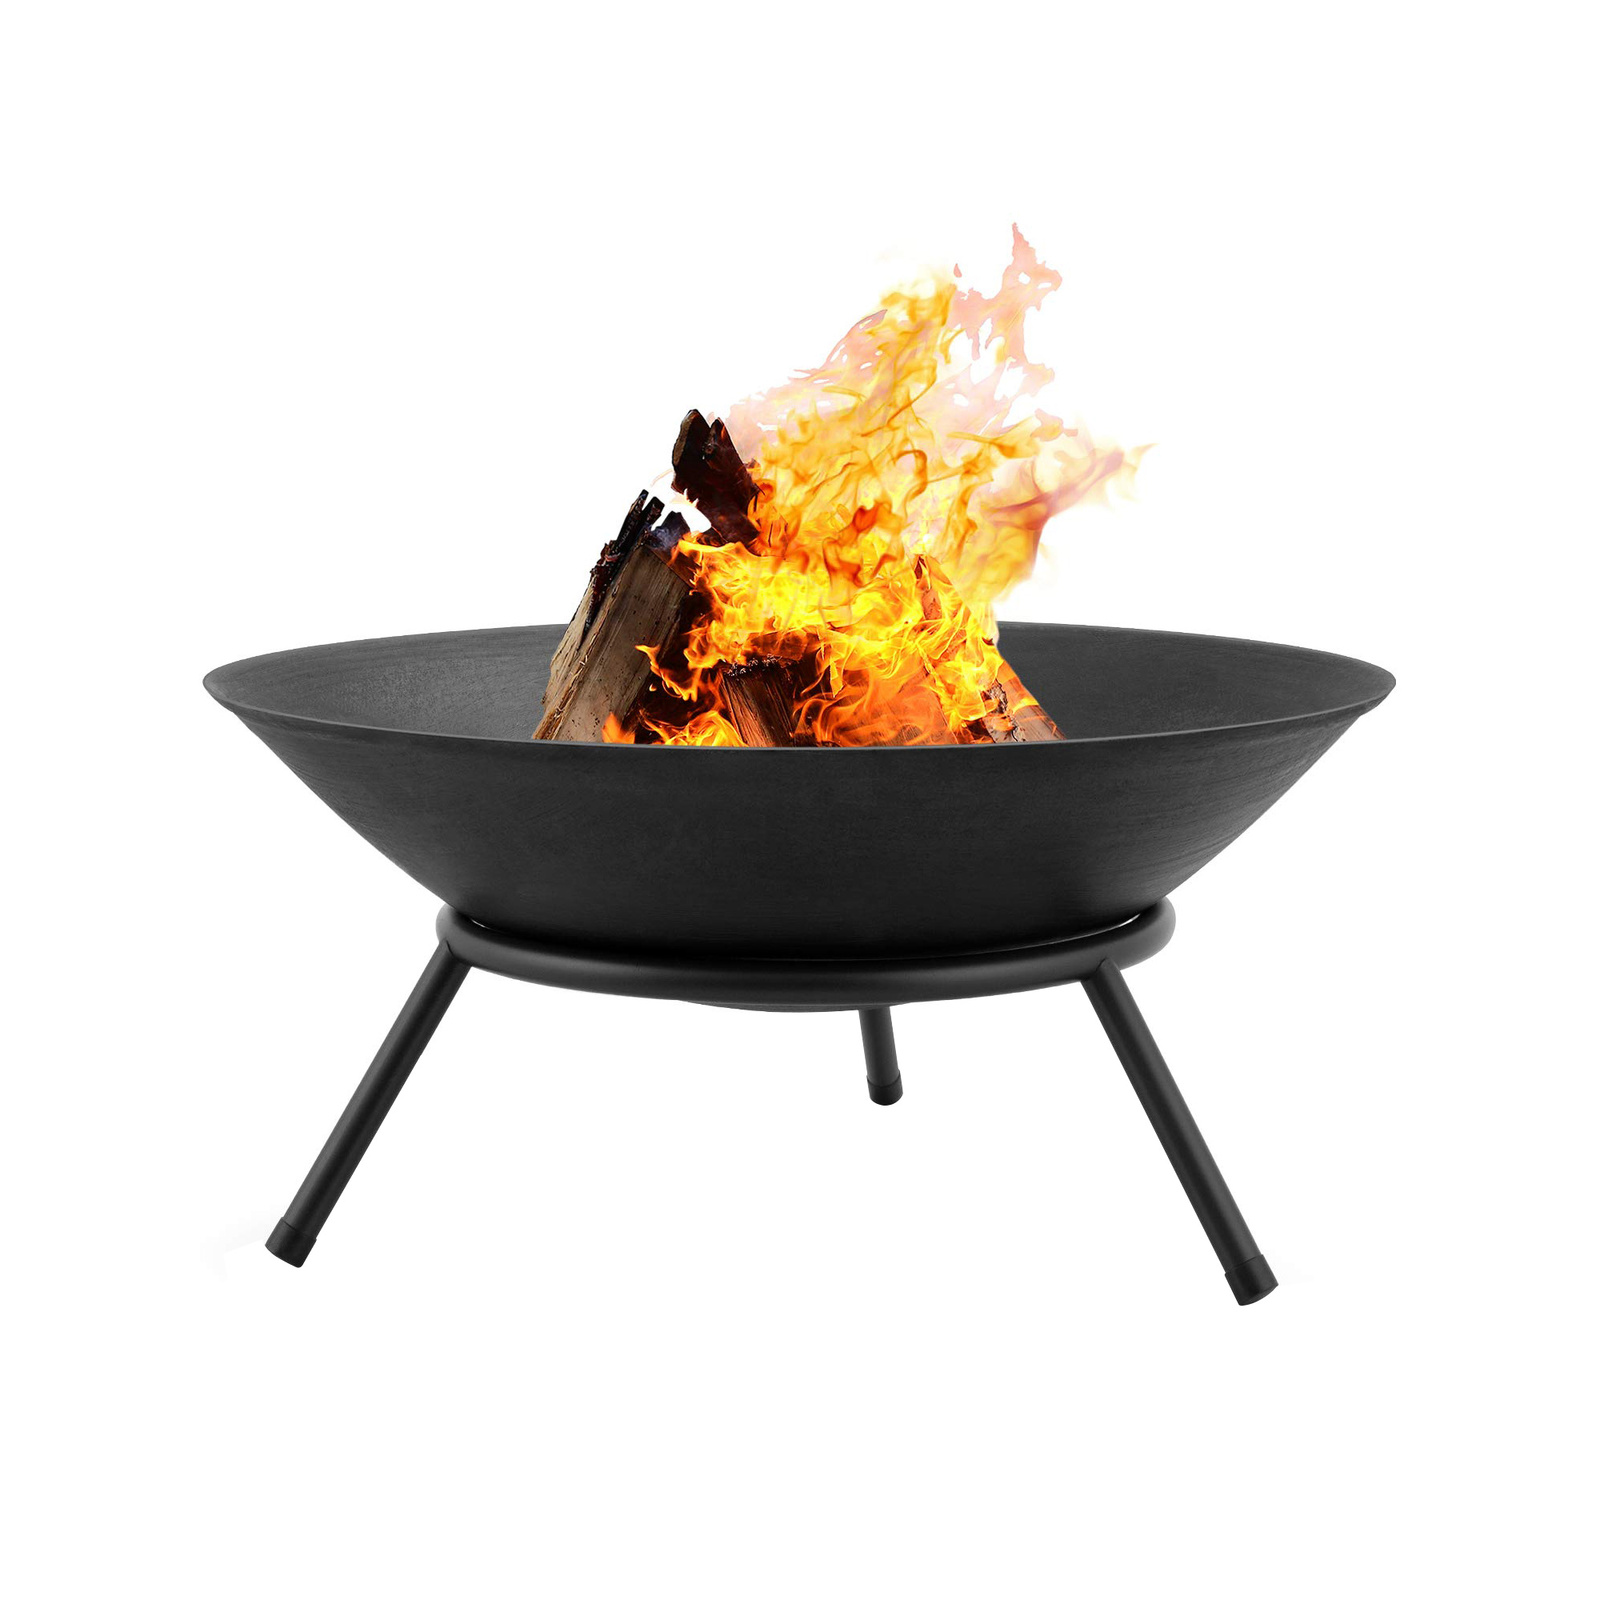 Raised Bowl Fire Pit Portable Outdoor Heater Patio Fireplace 54cm 